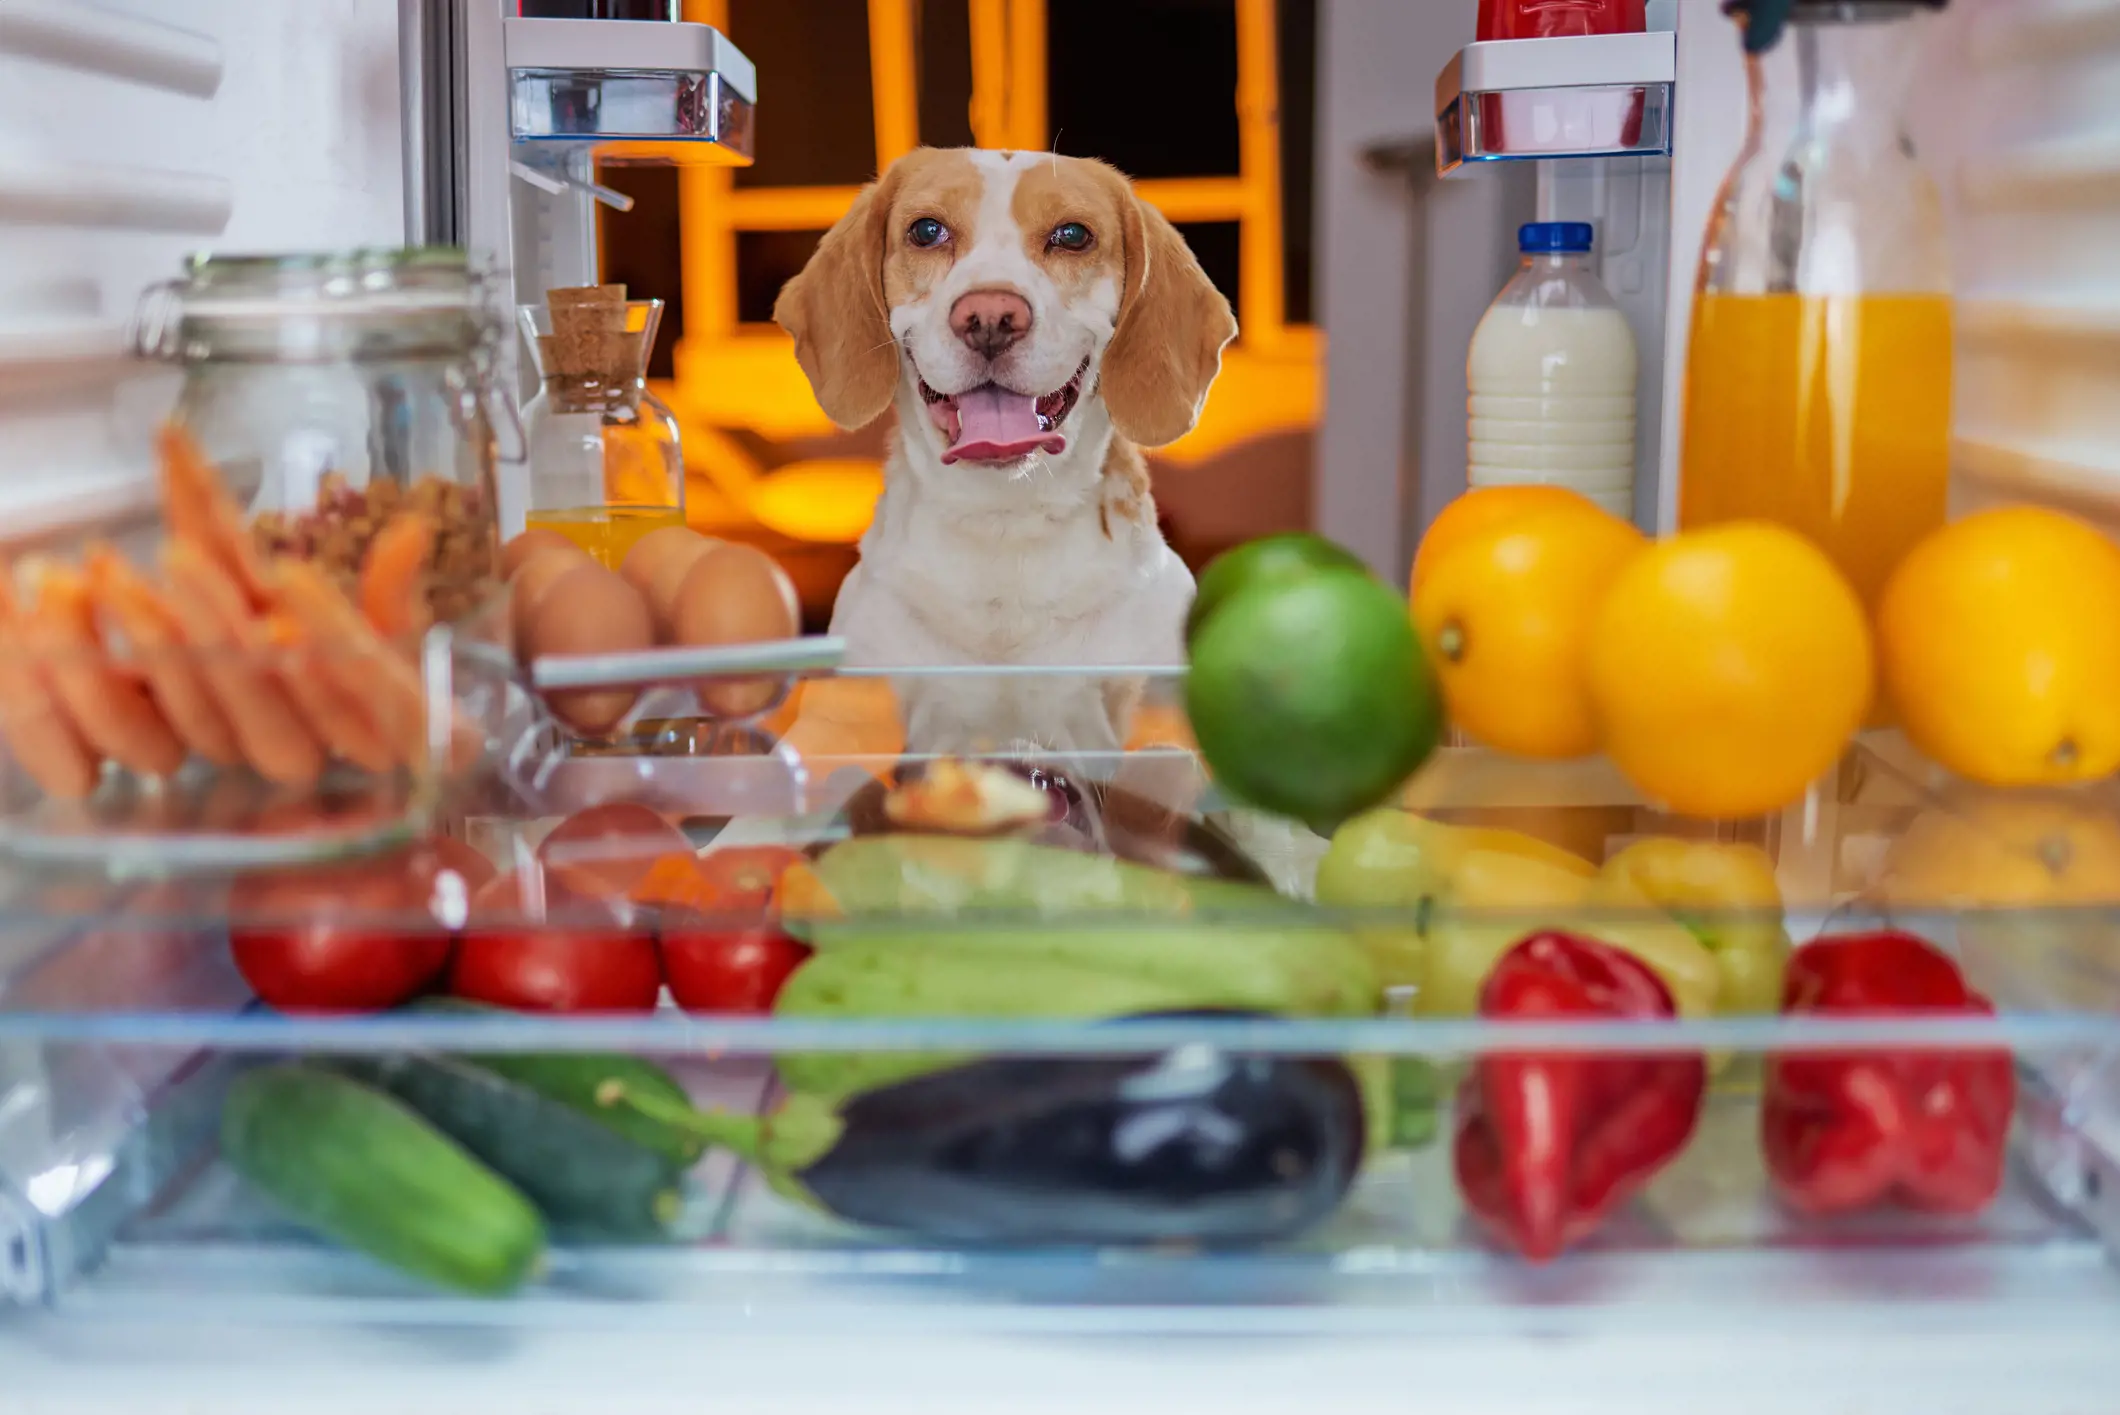 Would you feed your dog plant-based meals?